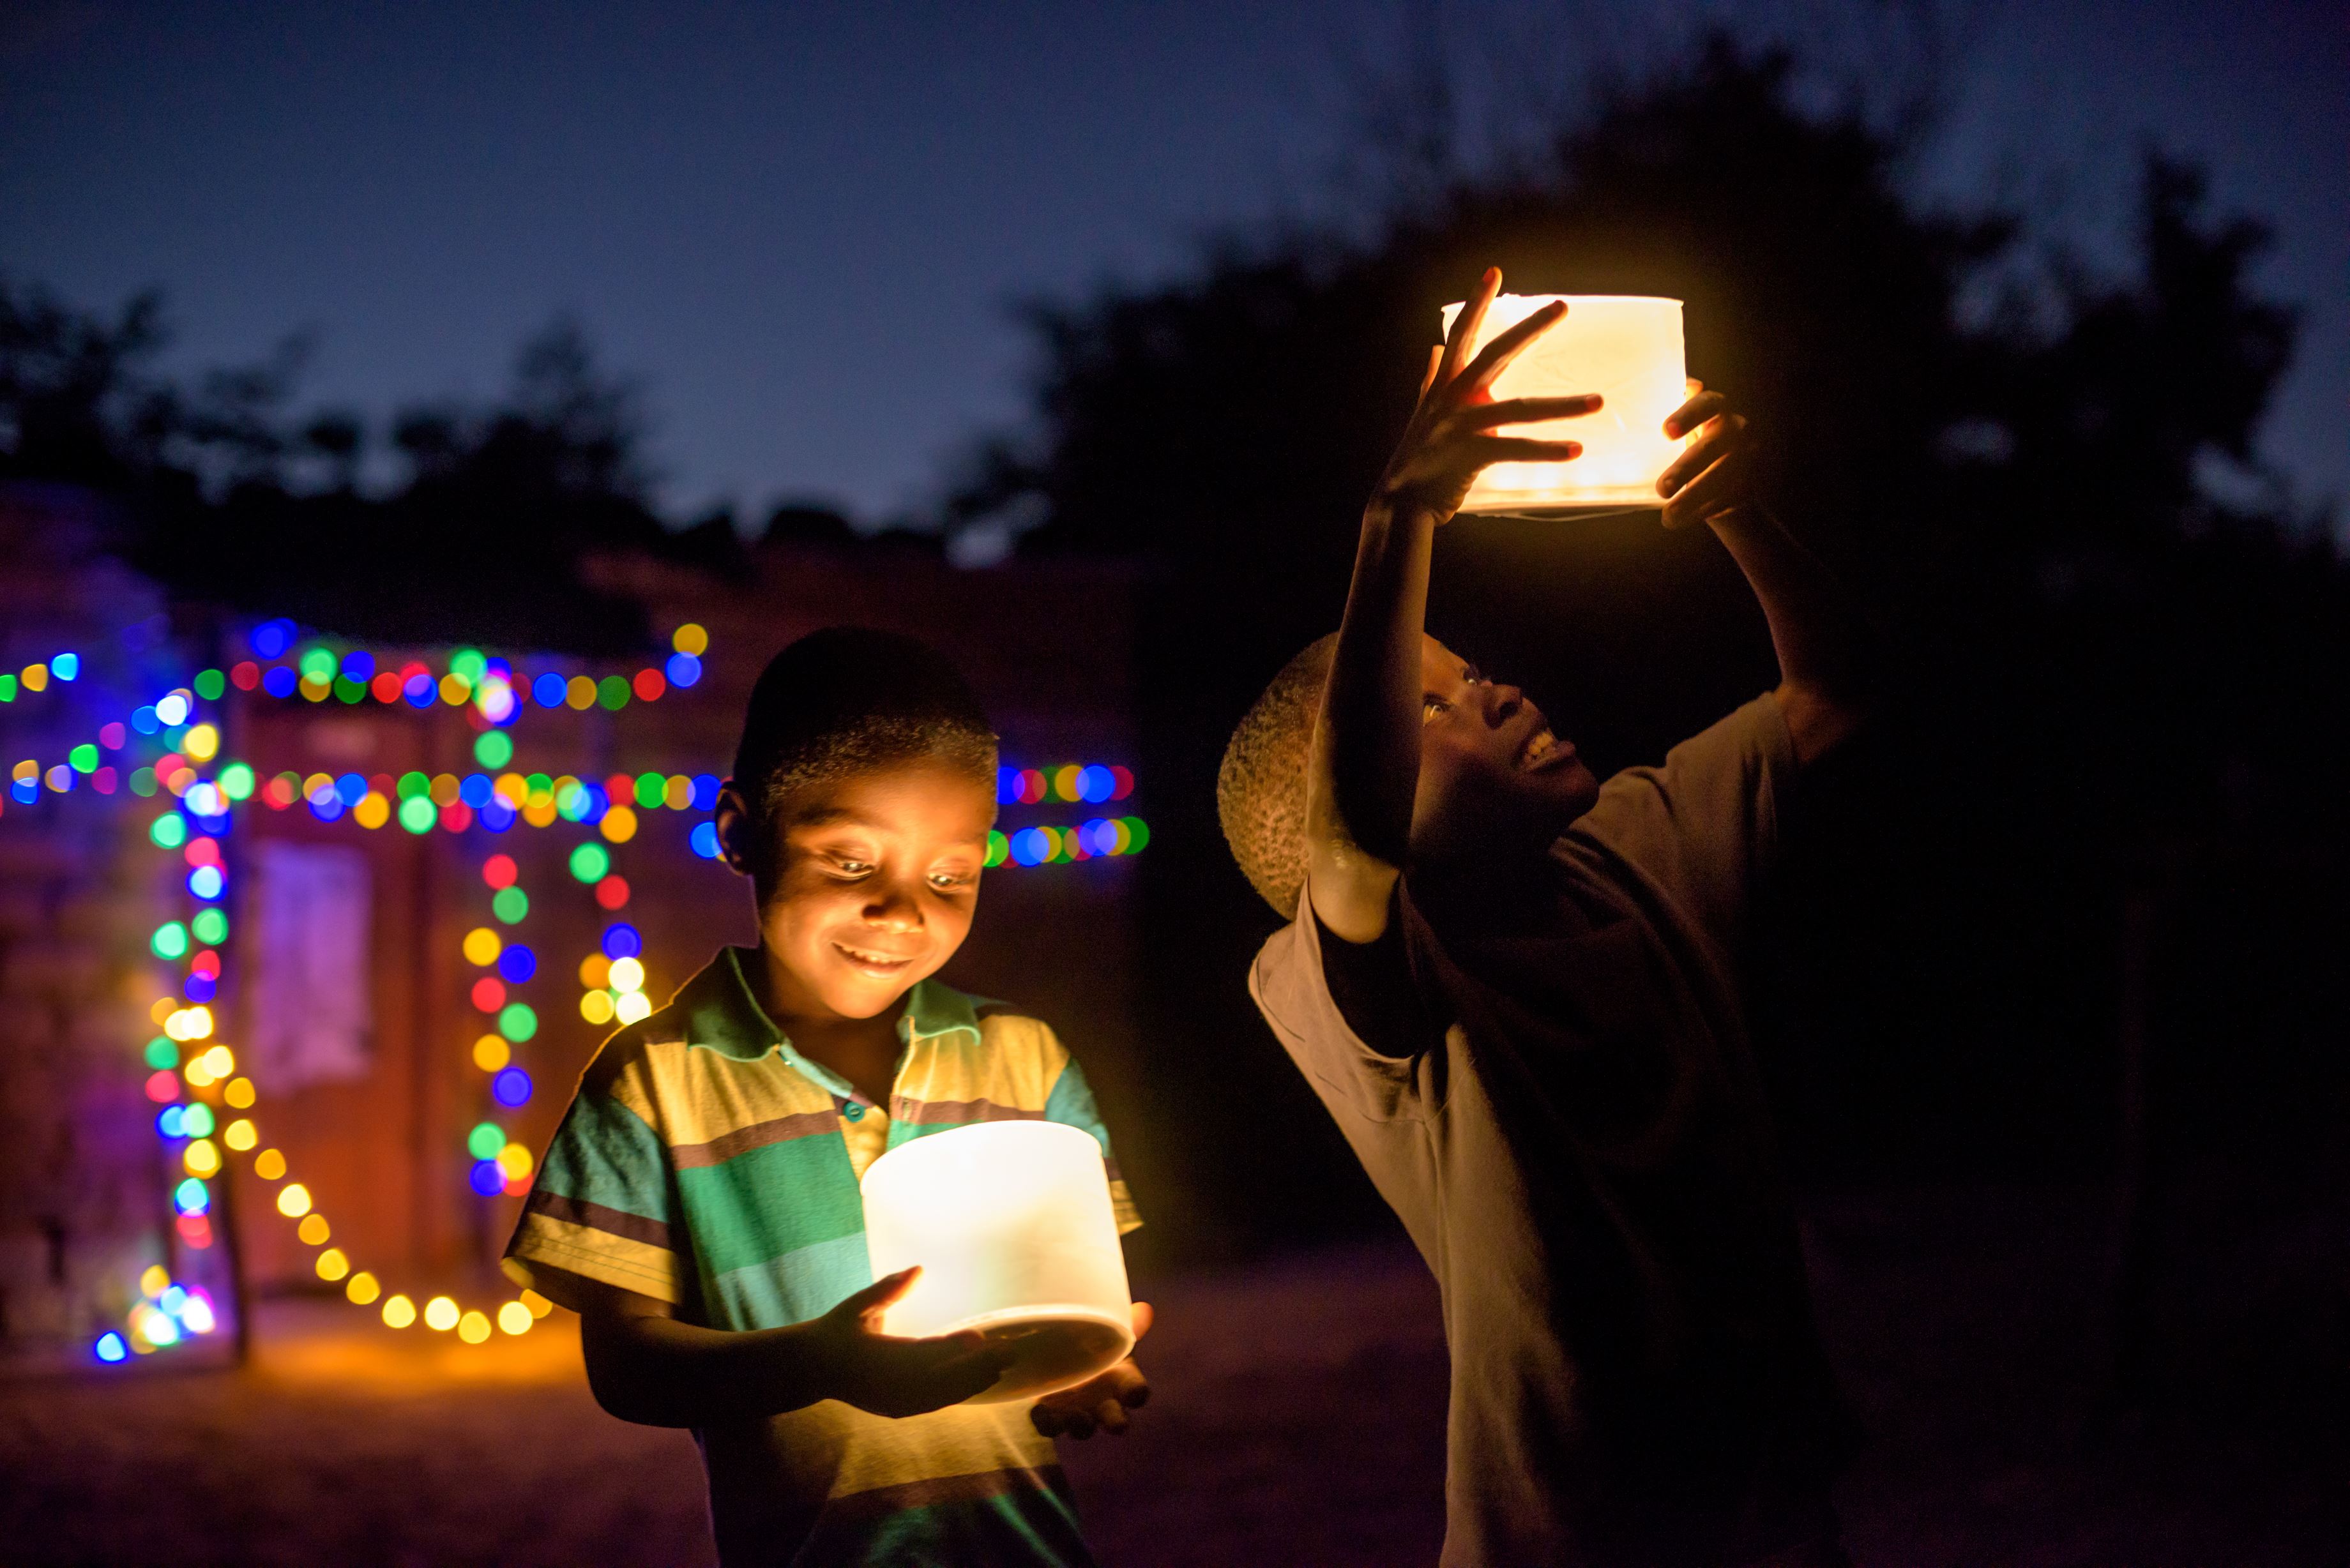 Sponsored boy Chansa, 5, (blue shirt) and his cousin, from Zambia, enjoy the Christmas lights at his grandparent's house